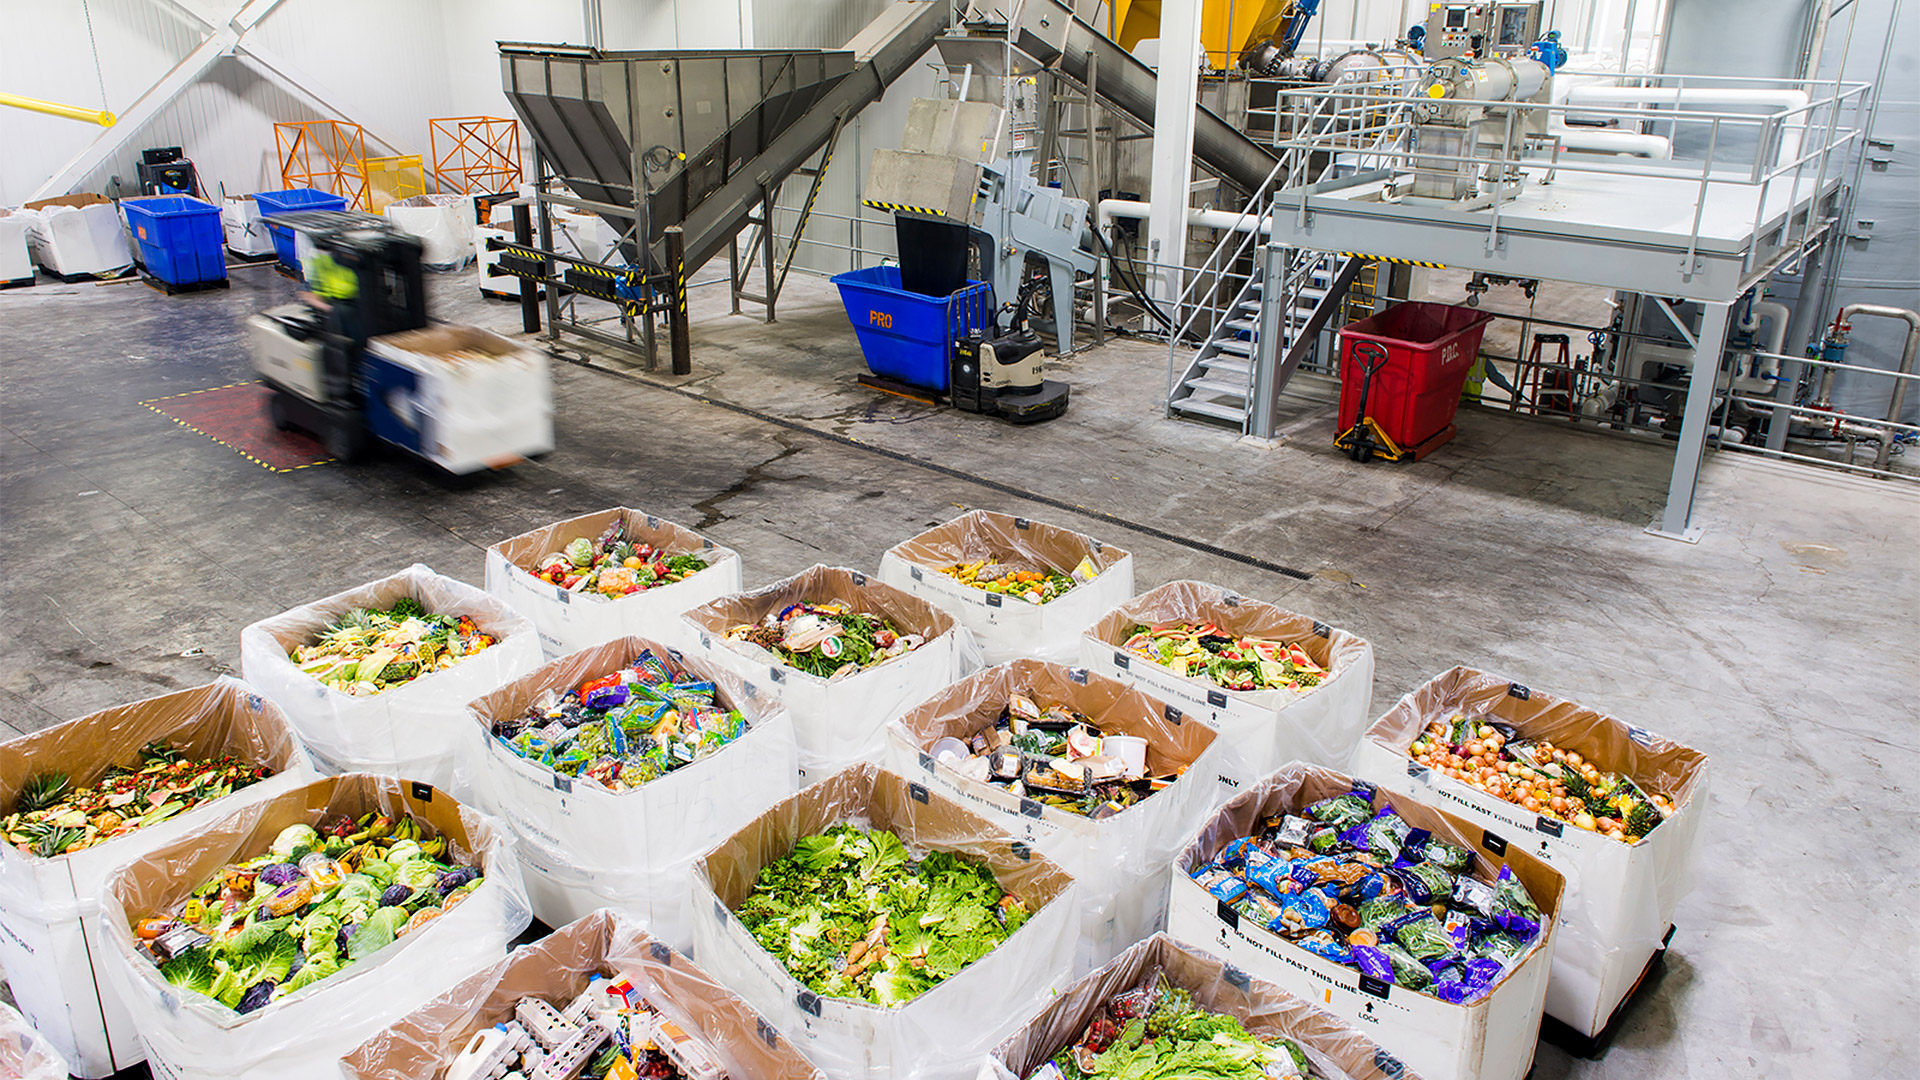 boxes of food waste in the Divert facility in Freetown, MA